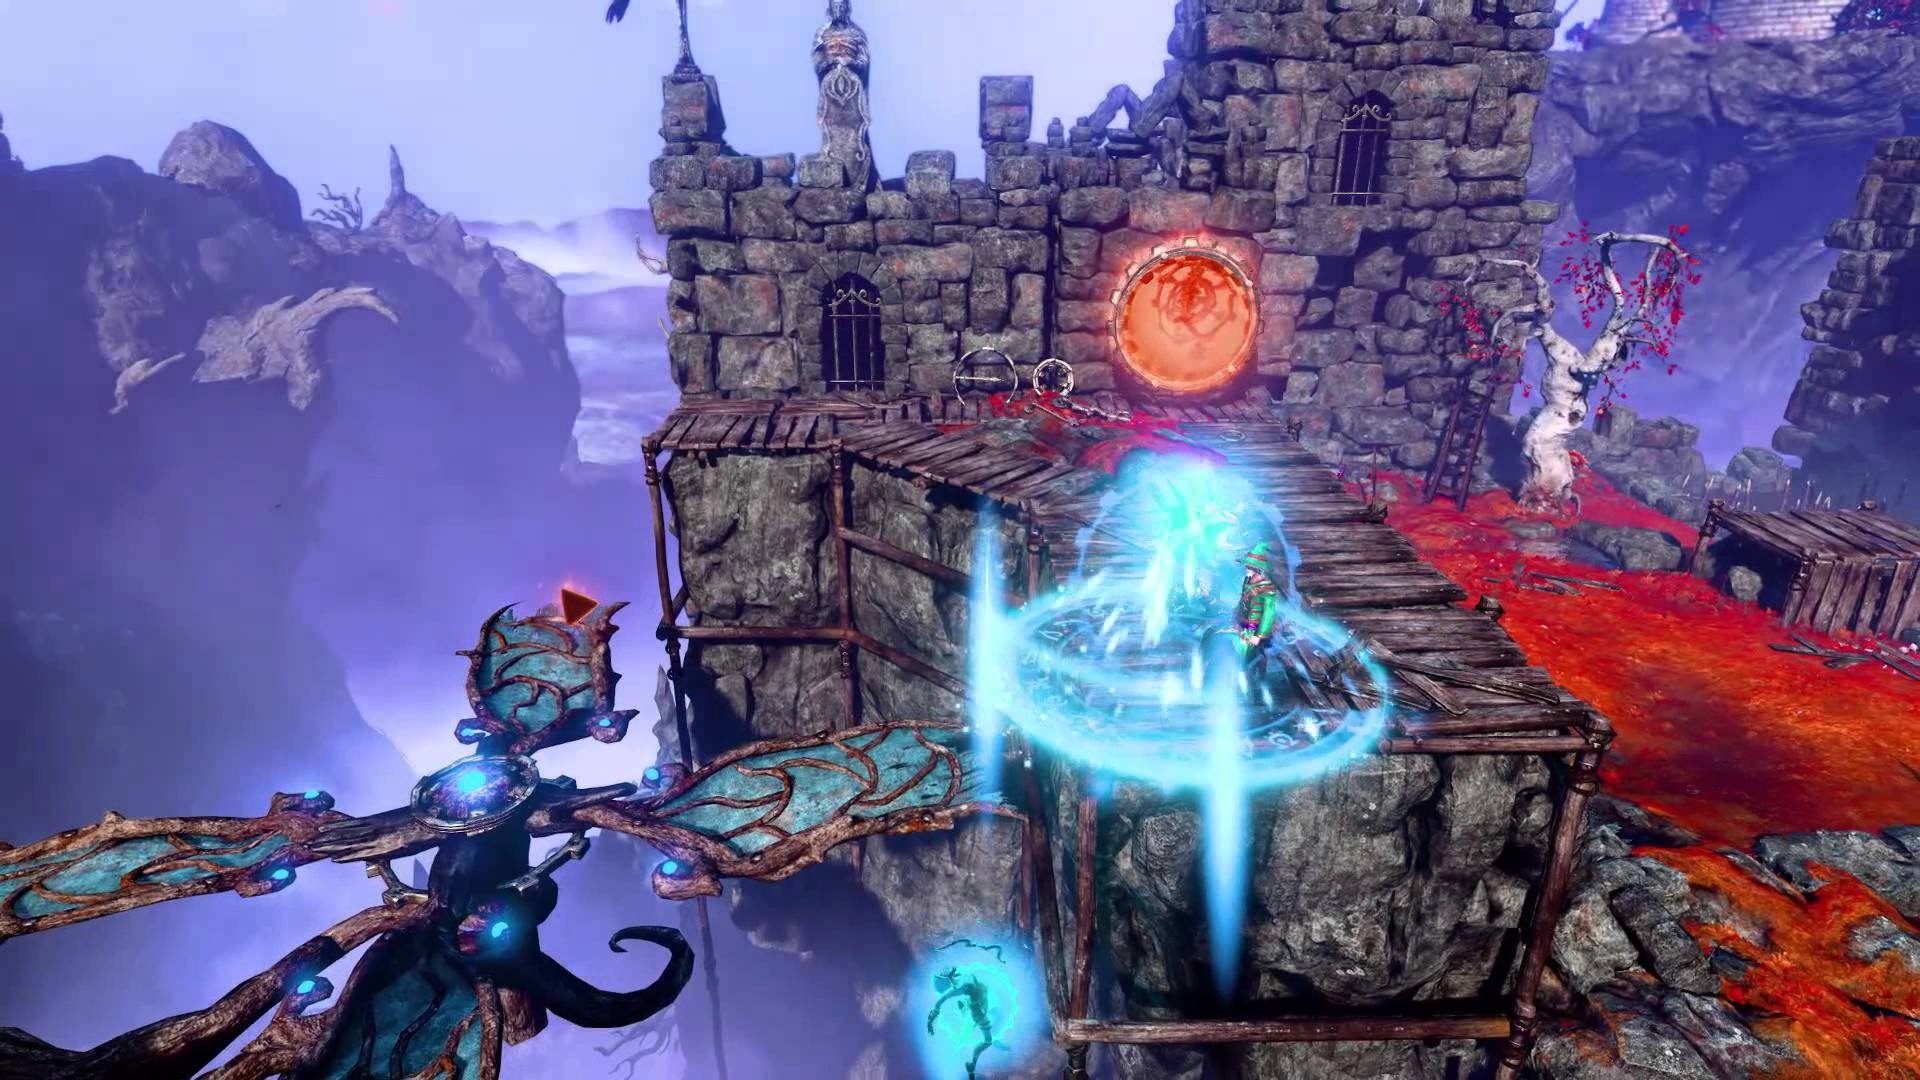 Trine 3: The Artifacts of Power gameplay trailer in German